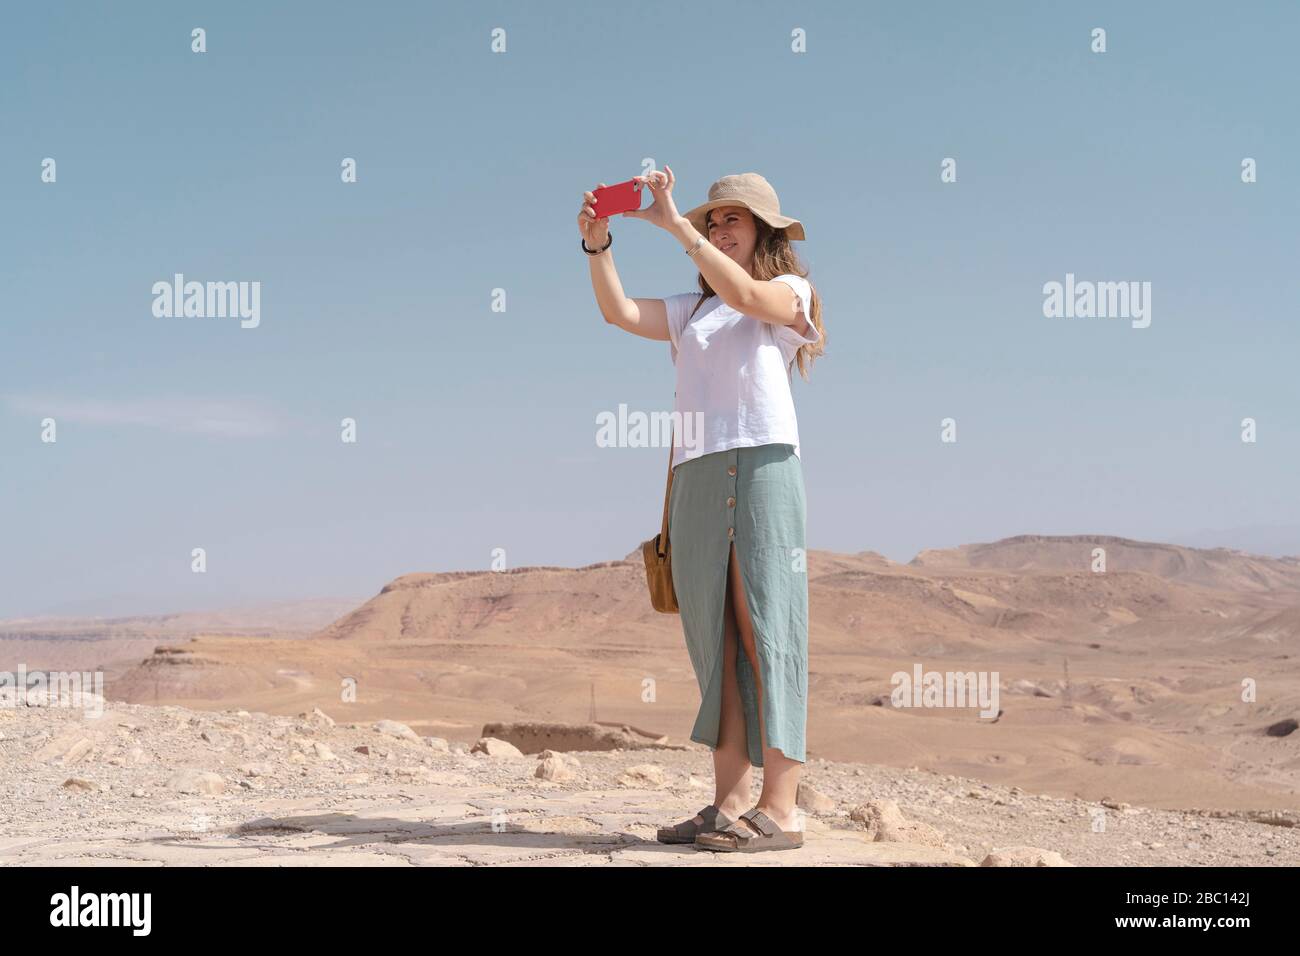 Young woman taking photos with smartphone, Ouarzazate, Morocco Stock Photo